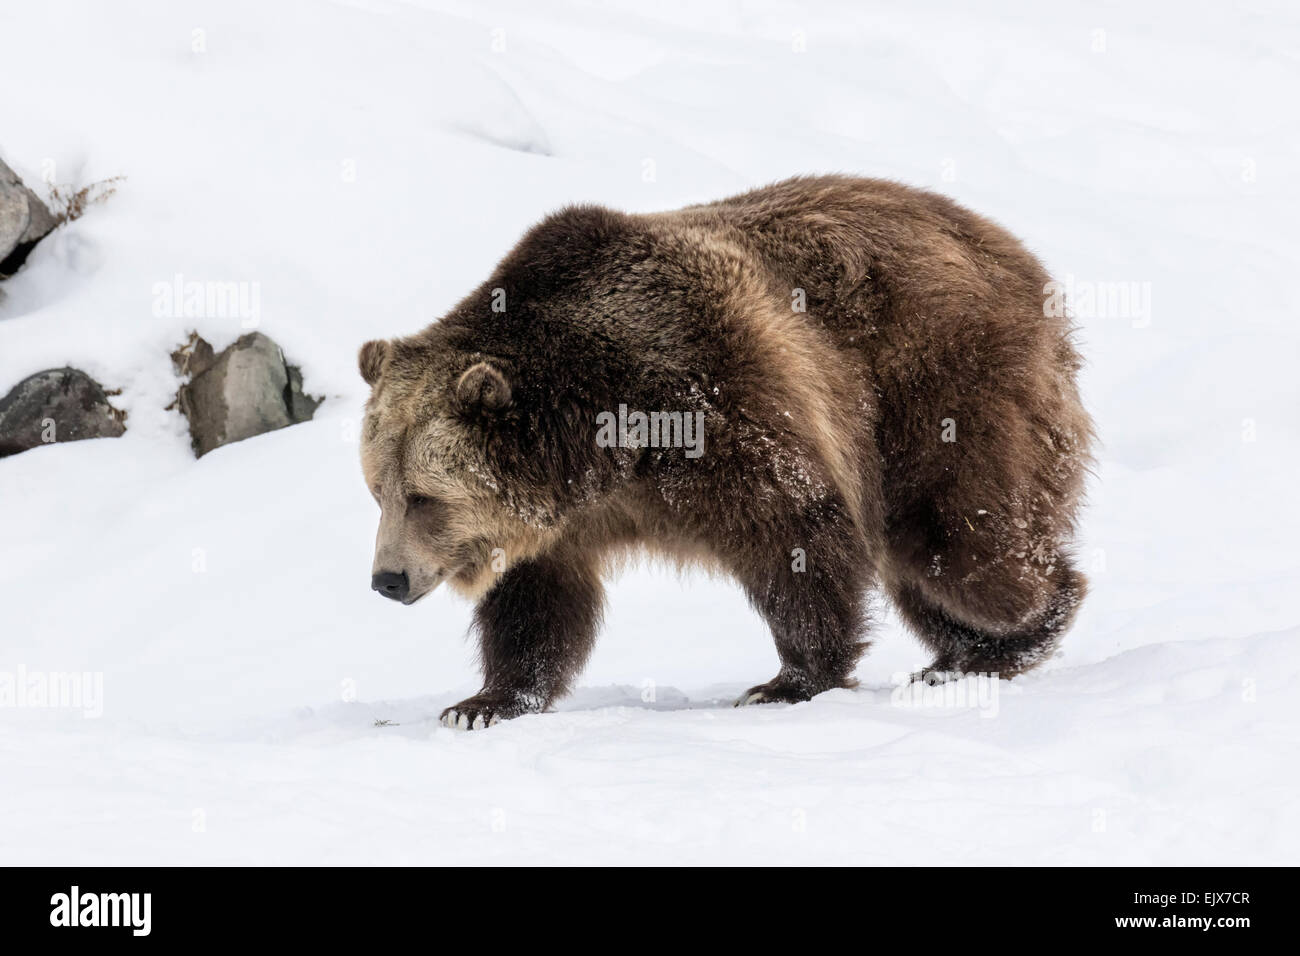 Brown Bear in winters snow Stock Photo